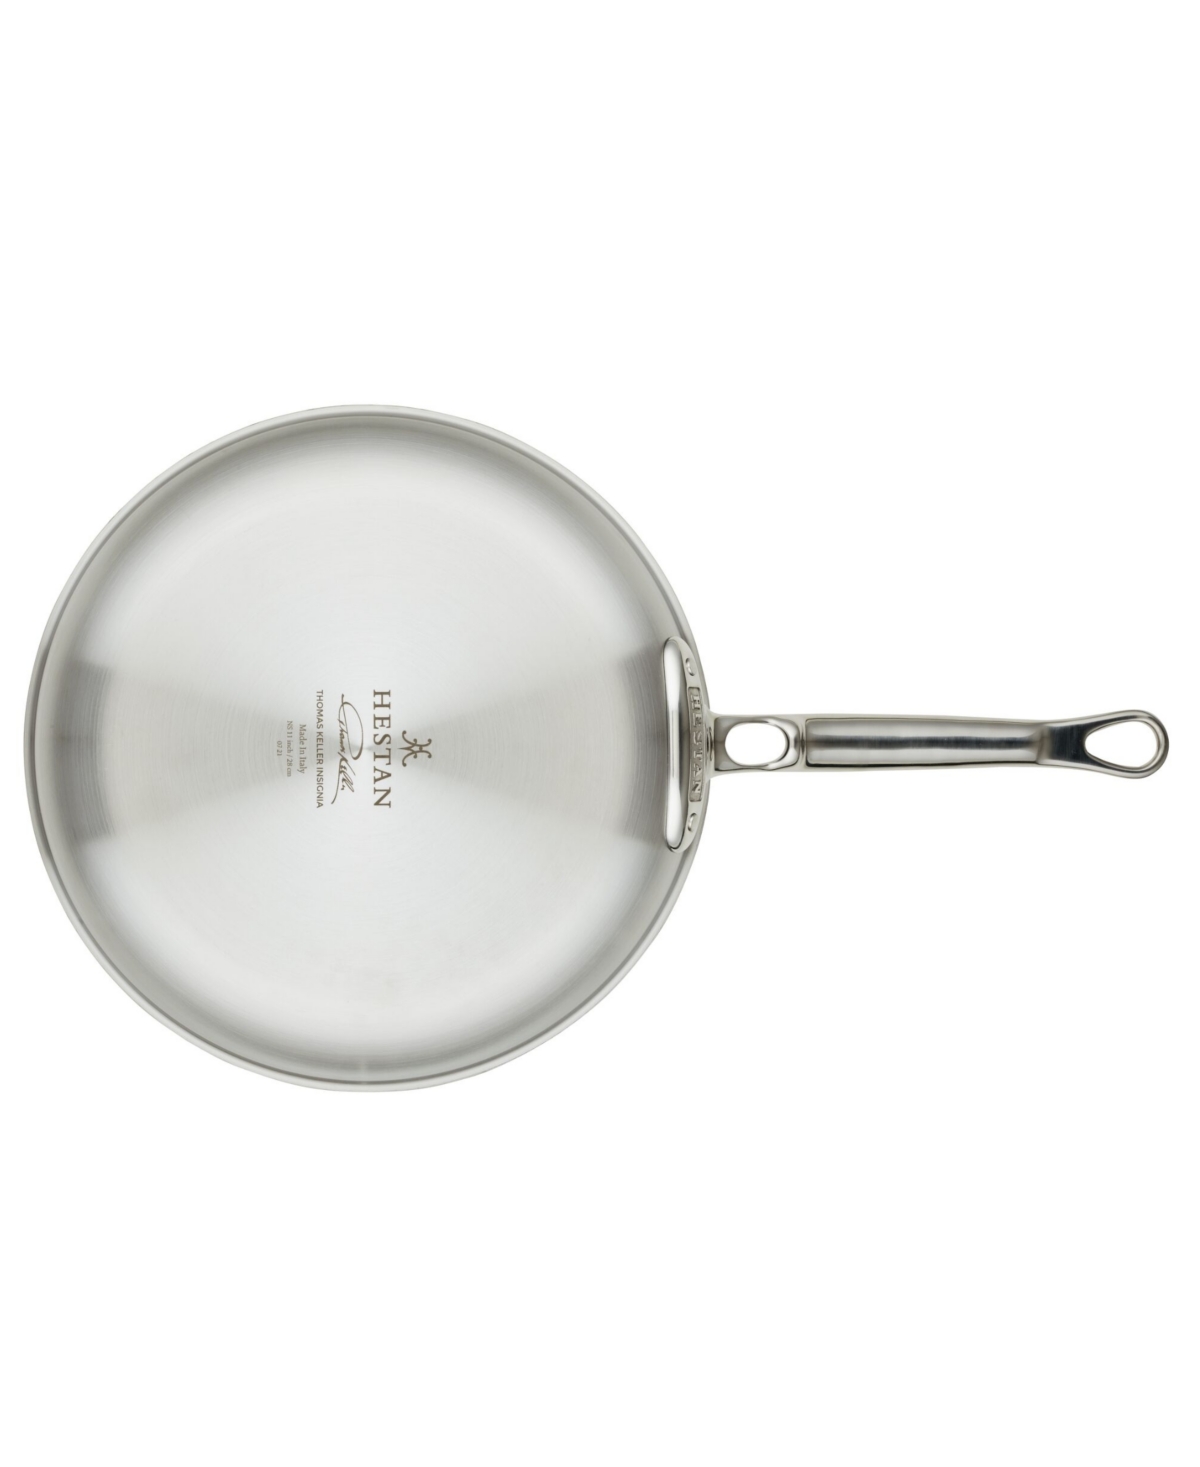 Shop Hestan Thomas Keller Insignia Commercial Clad Stainless Steel 11" Open Saute Pan In No Color